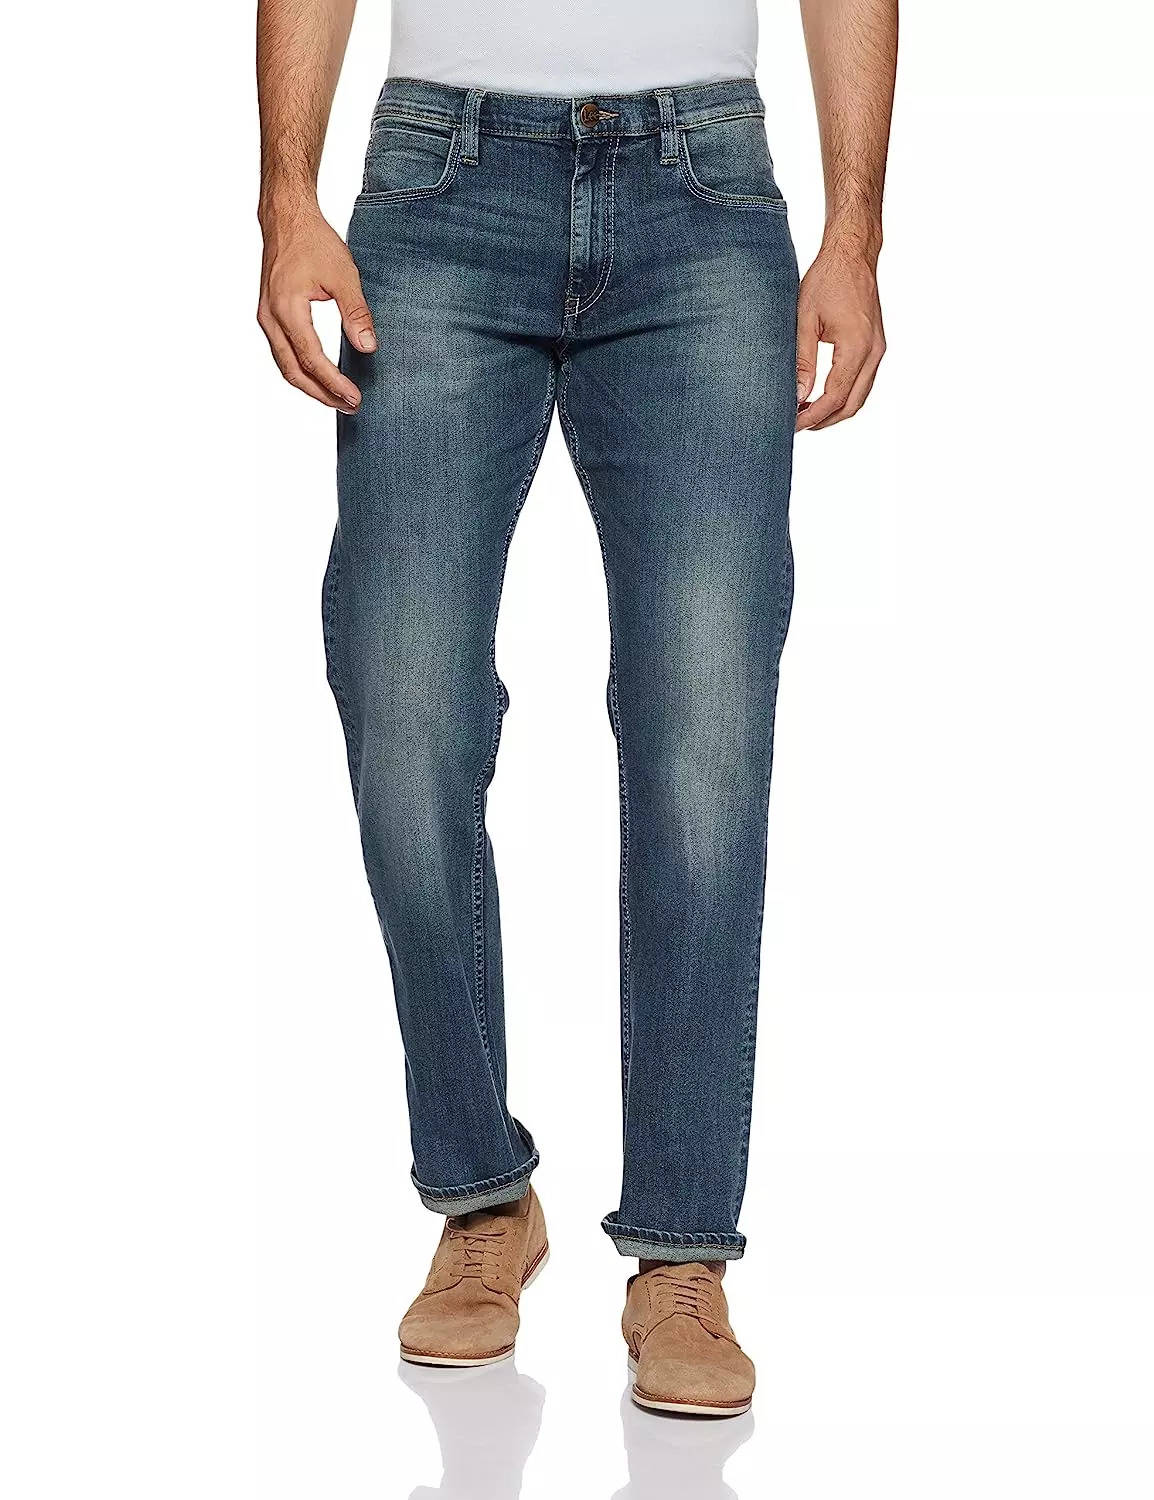 Jeans for Men Under 3000: 6 Best Jeans for Men Under 3000 in India to  Complement Every Look - The Economic Times